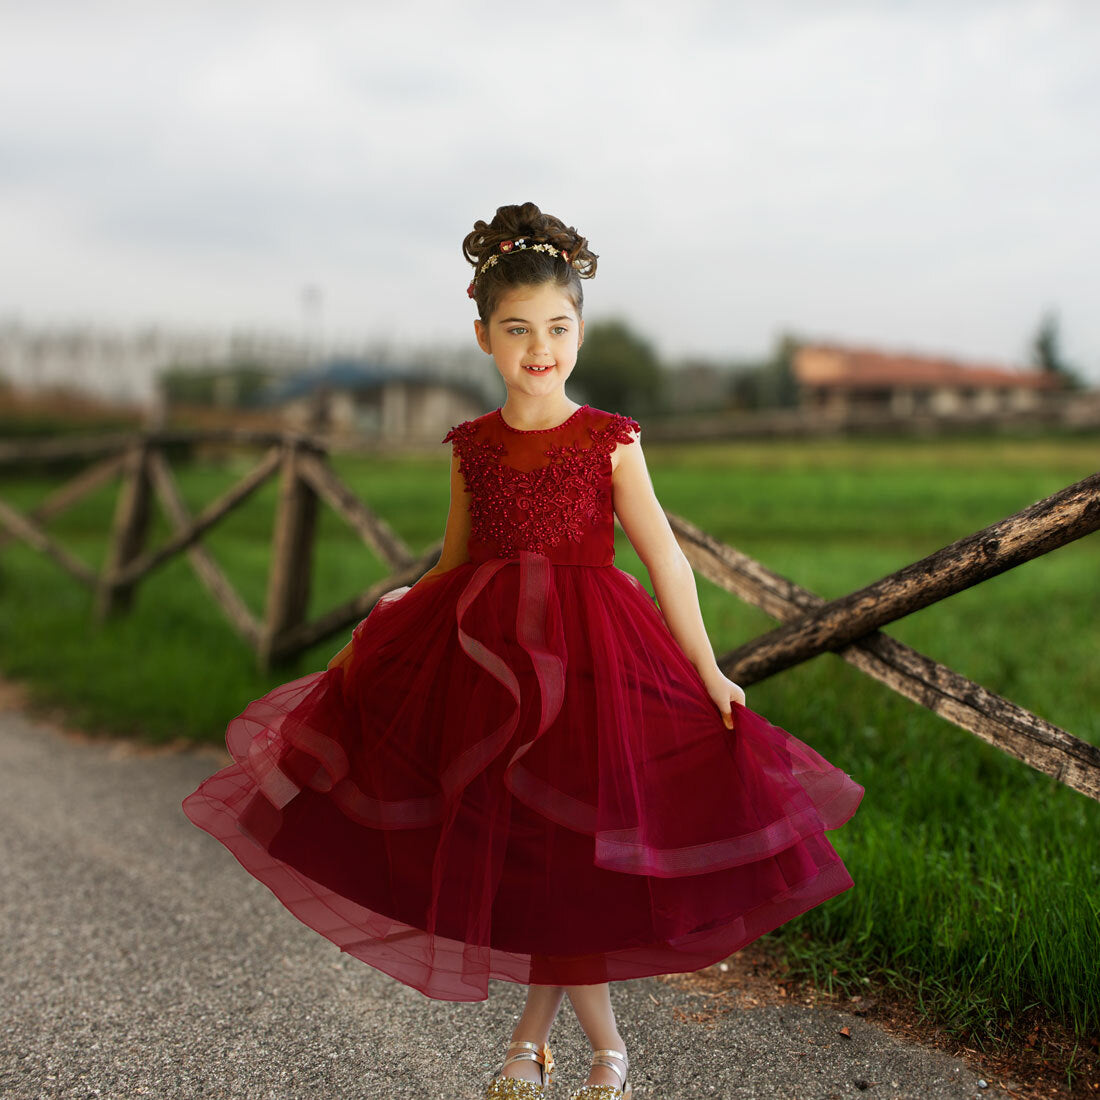 4 Flower Girl Dresses Perfect for a Rustic Wedding